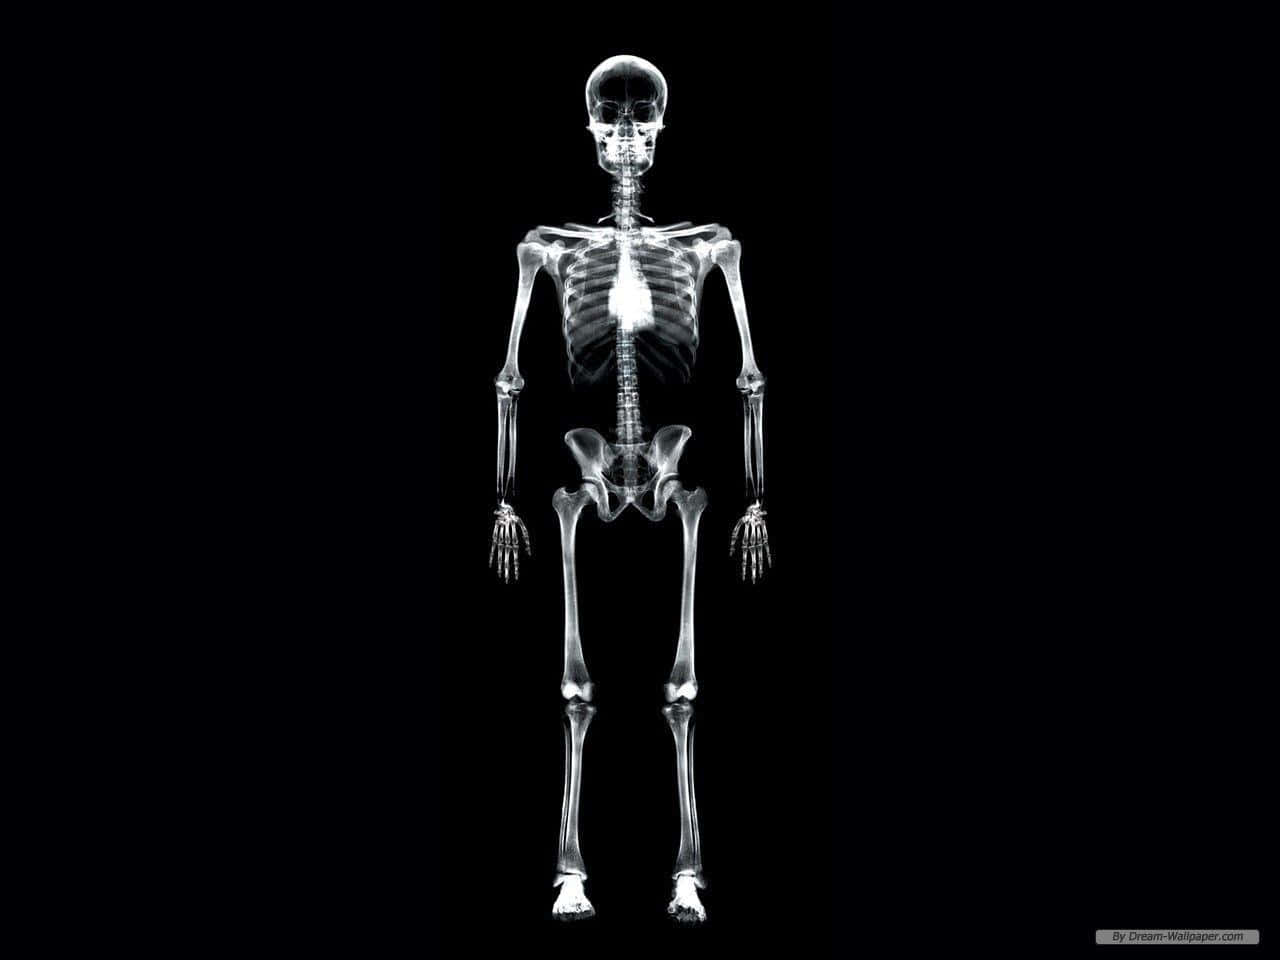 A Skeleton Is Shown On A Black Background Wallpaper